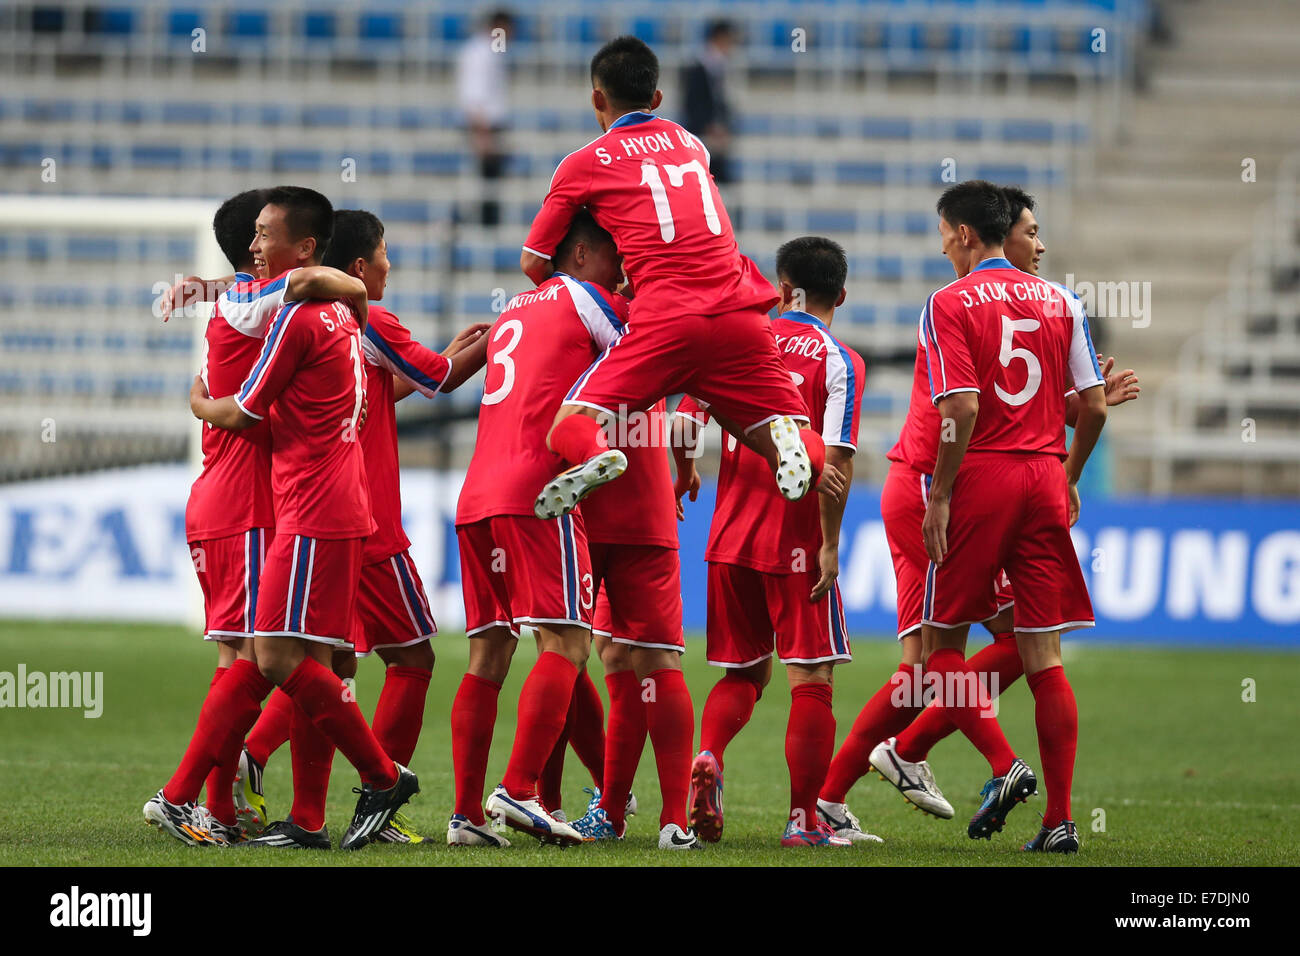 Incheon, South Korea. 15th Sep, 2014. Players of the Democratic People's Republic of Korea (DPRK) celebrate for a goal during the men's football first round group F match against China at the 17th Asian Games in Incheon, South Korea, on Sept. 15, 2014. © Zhang Fan/Xinhua/Alamy Live News Stock Photo